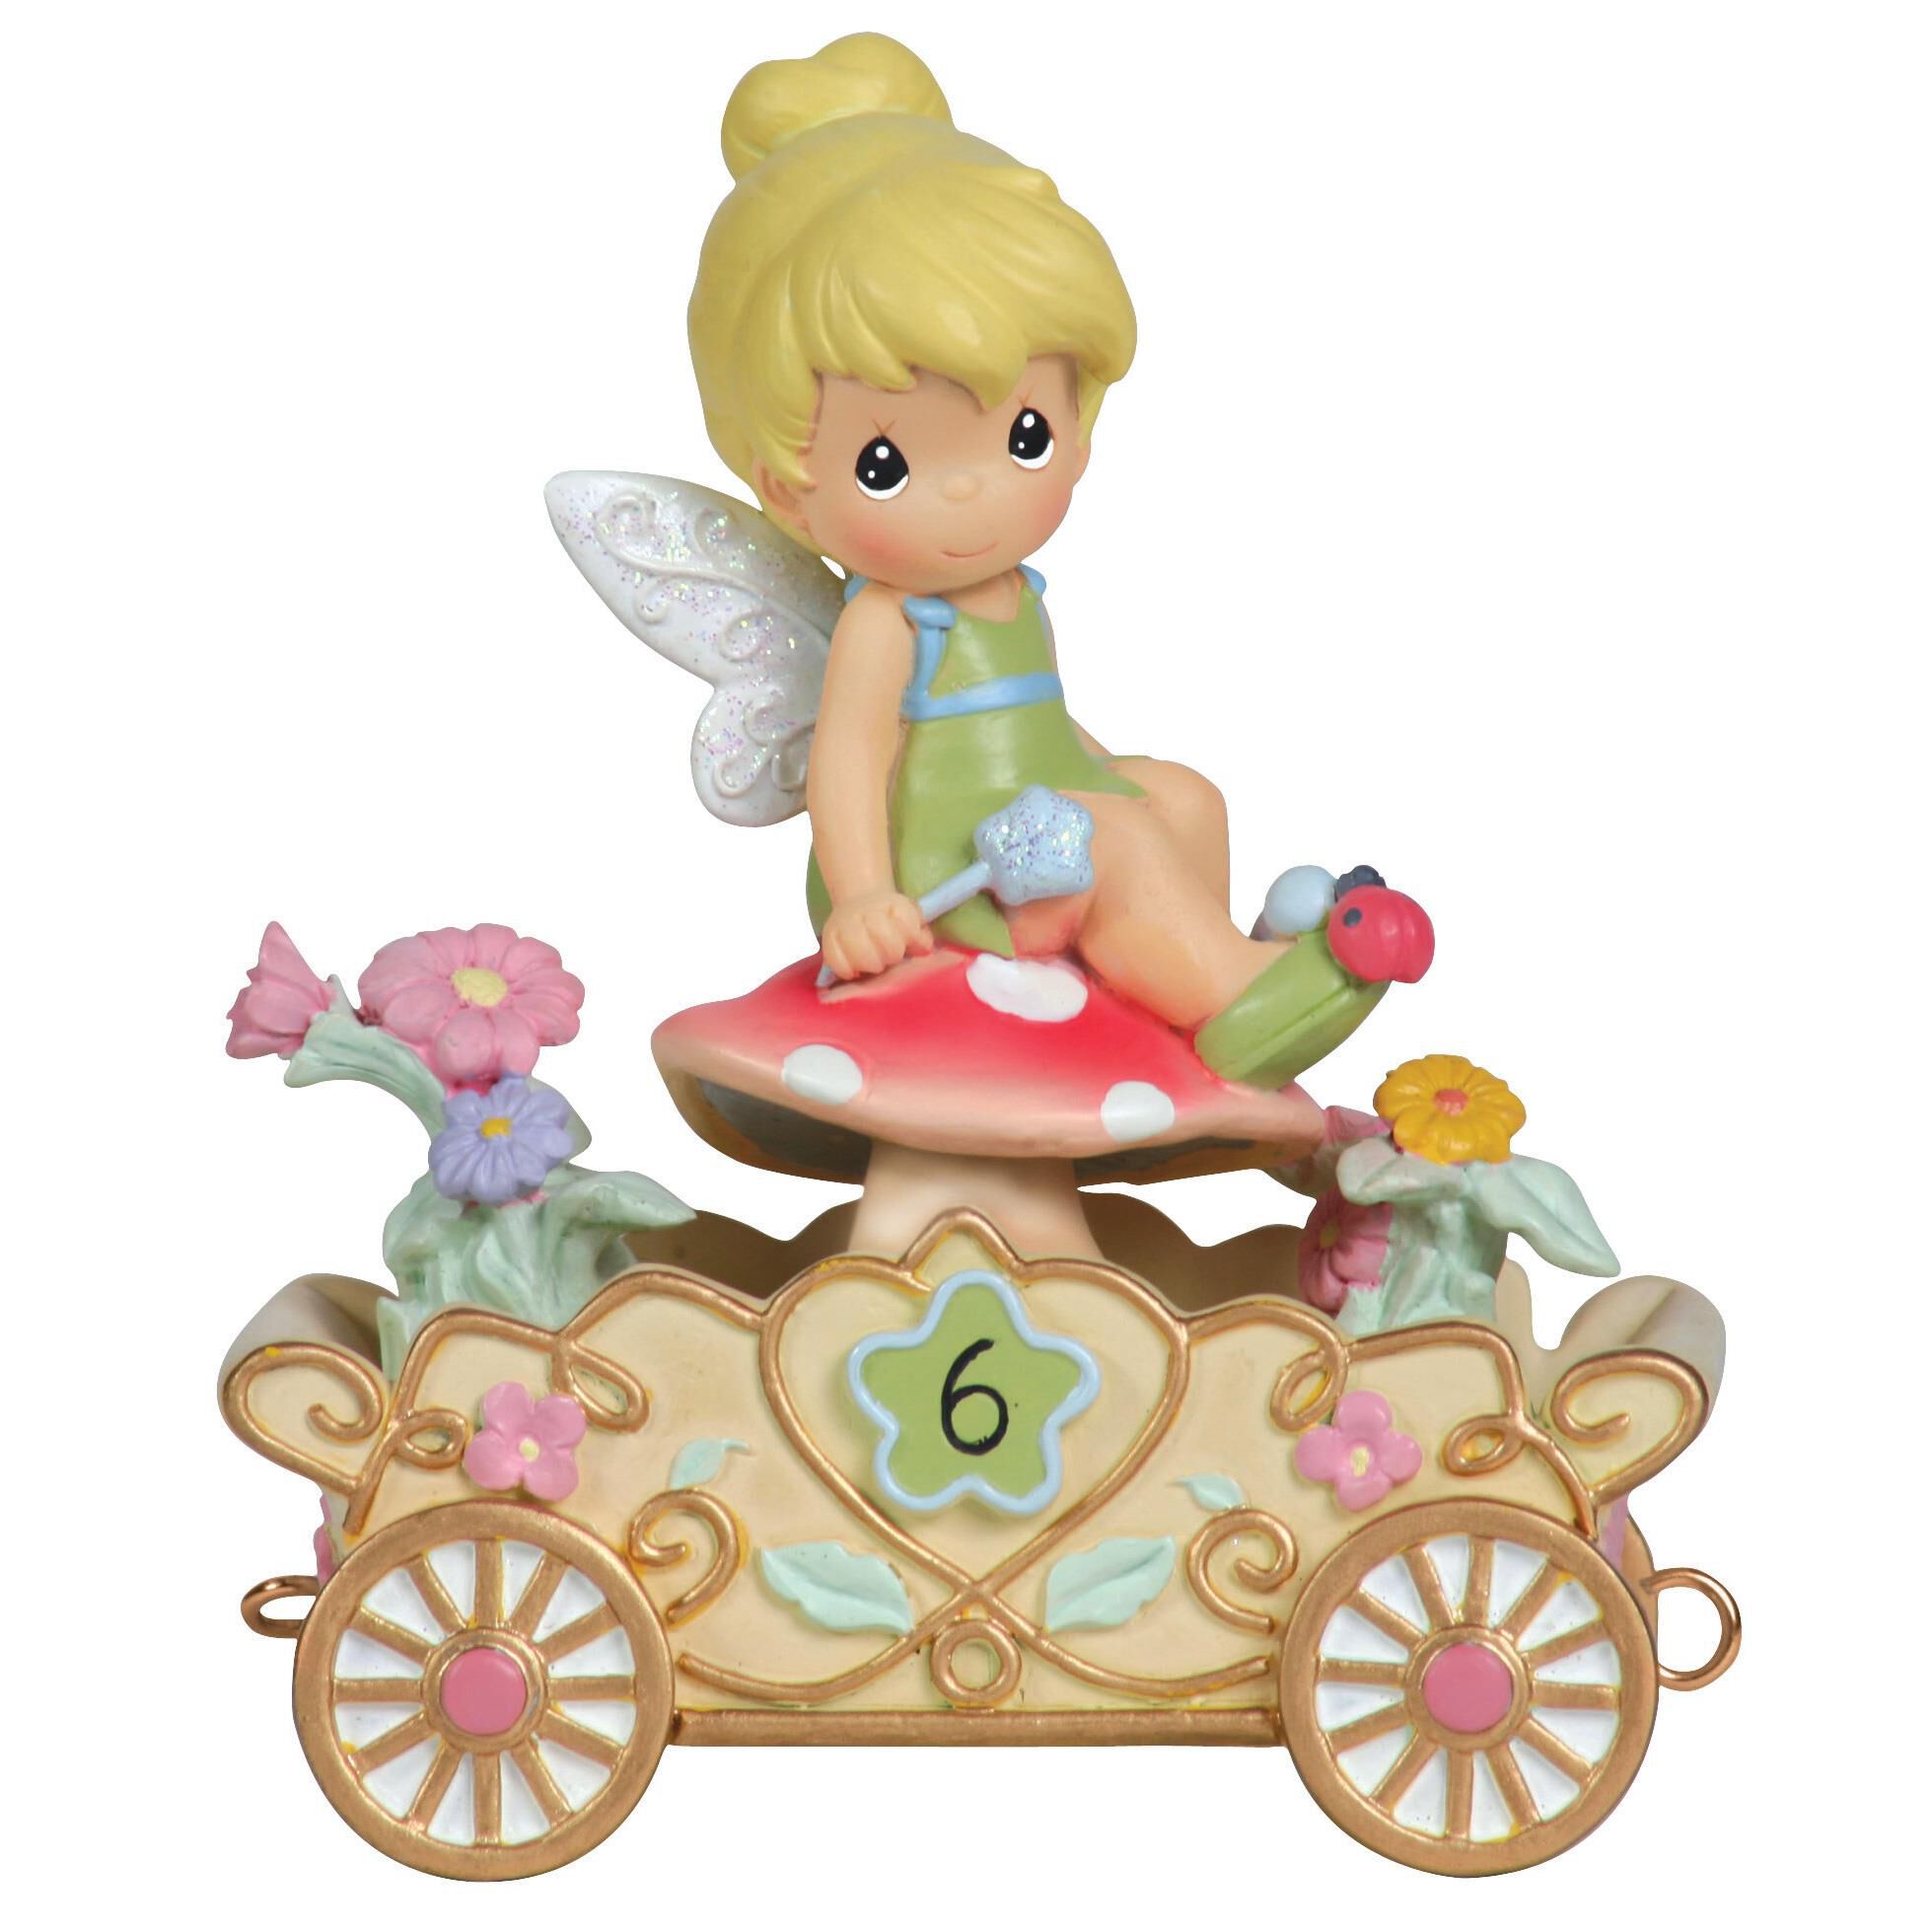 Precious Moments Hallmark: Tinker Bell Disney Peter Pan Ornament 2018 for sale online 